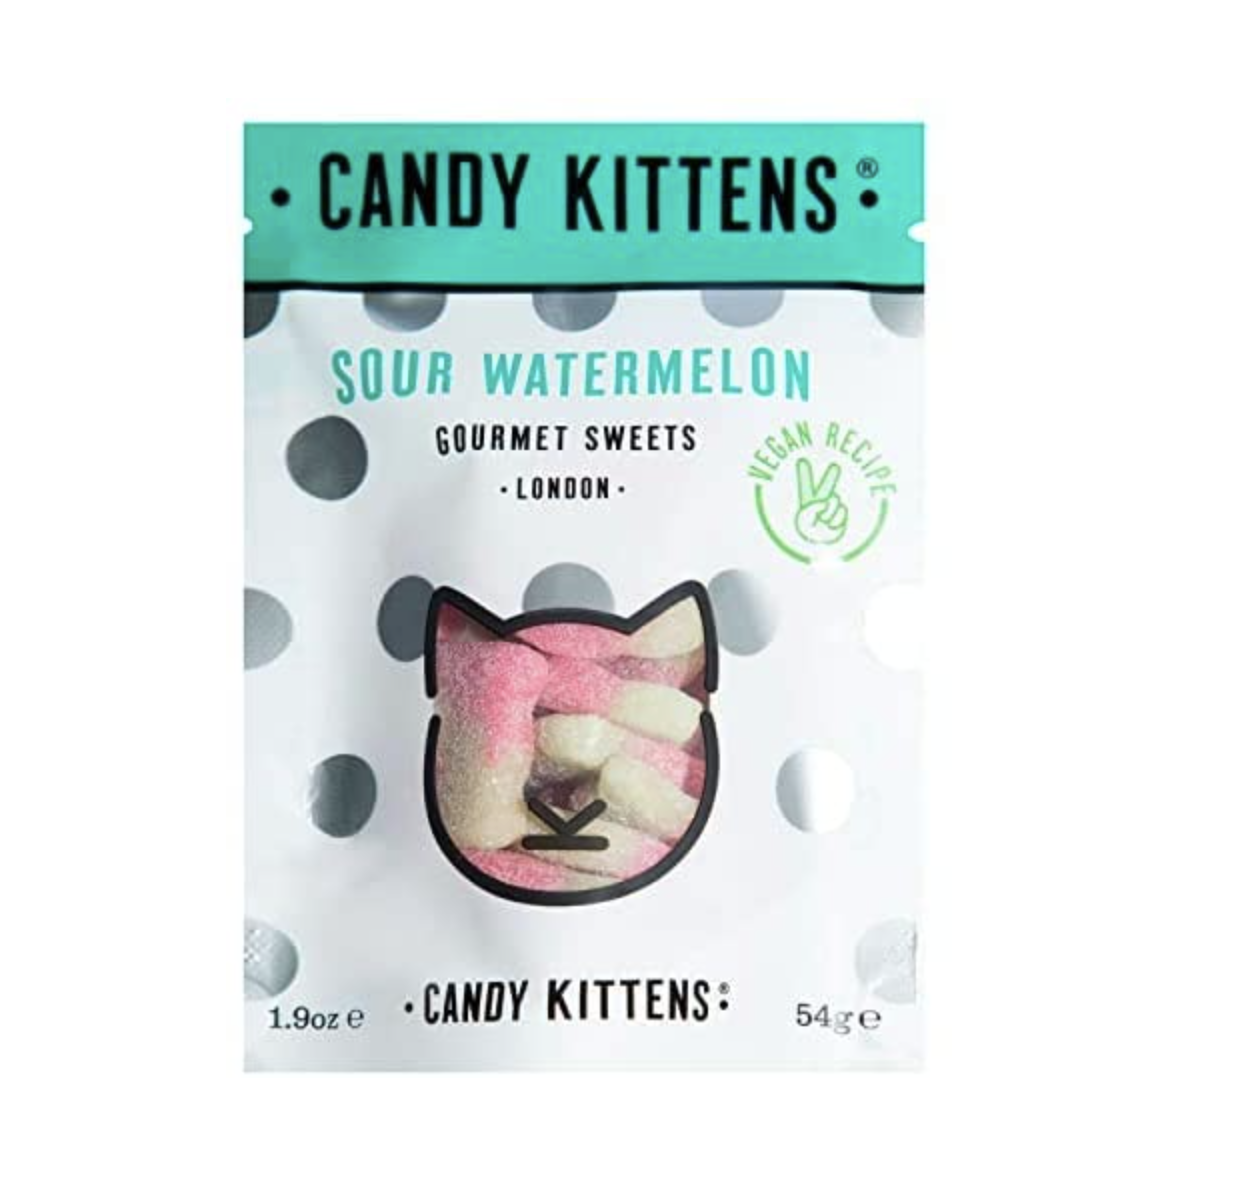 Candy Kittens sour watermelon sweets